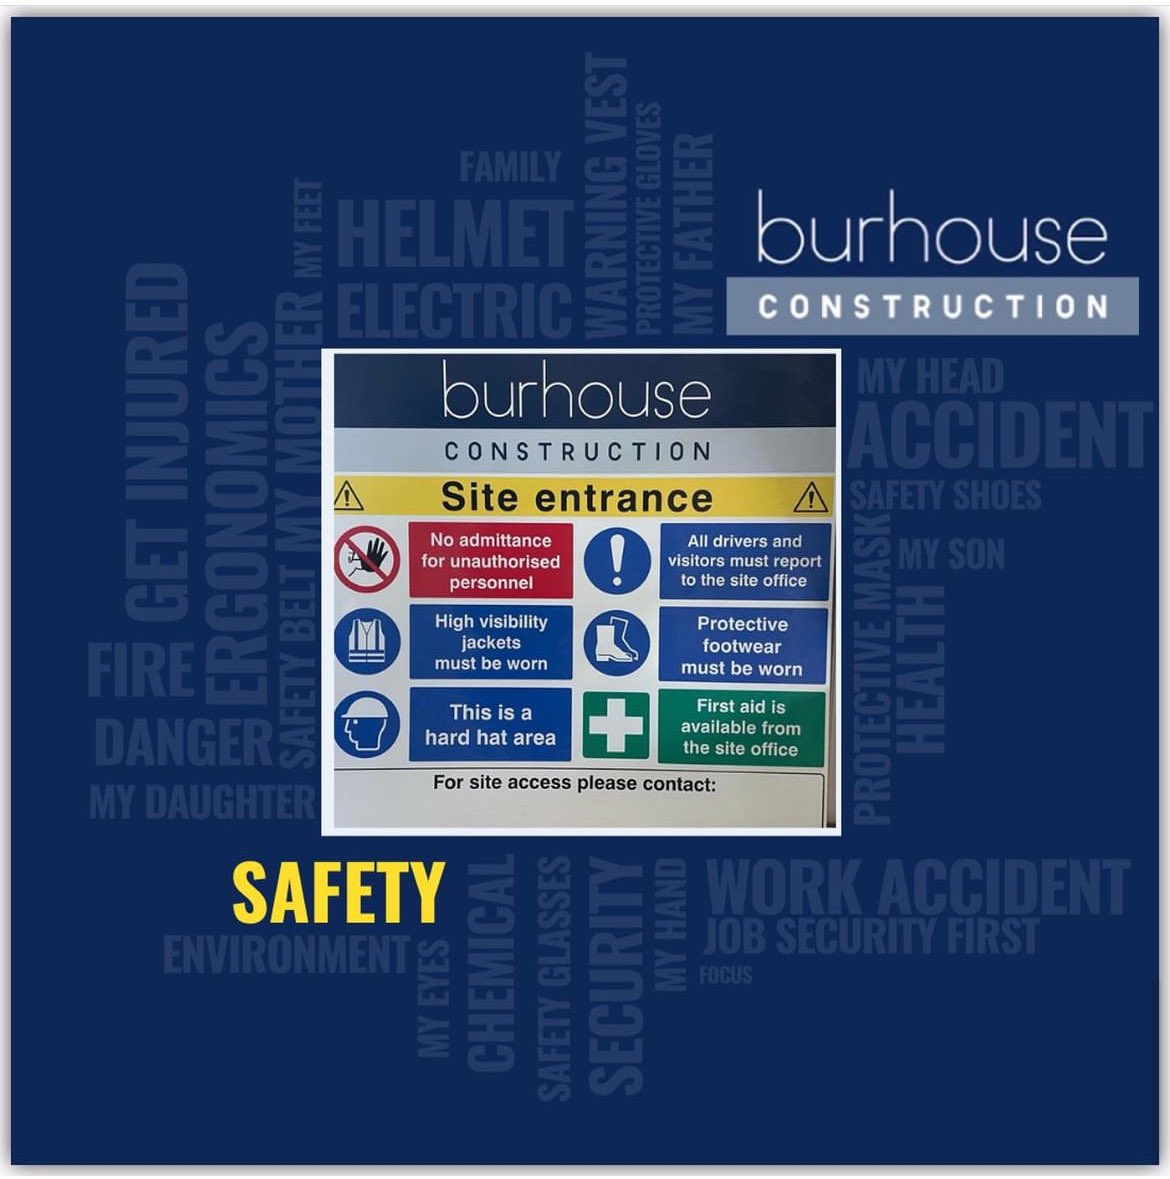 Think safe, work safe, be safe. 

Safety is paramount, and is always the first priority on every site 🦺

#burhouseconstruction #constructionwithaconscience 
#constructioncompany
#renovationbuilding
#commercialrenovation
#residentialrenovation
#doncasterisgreat